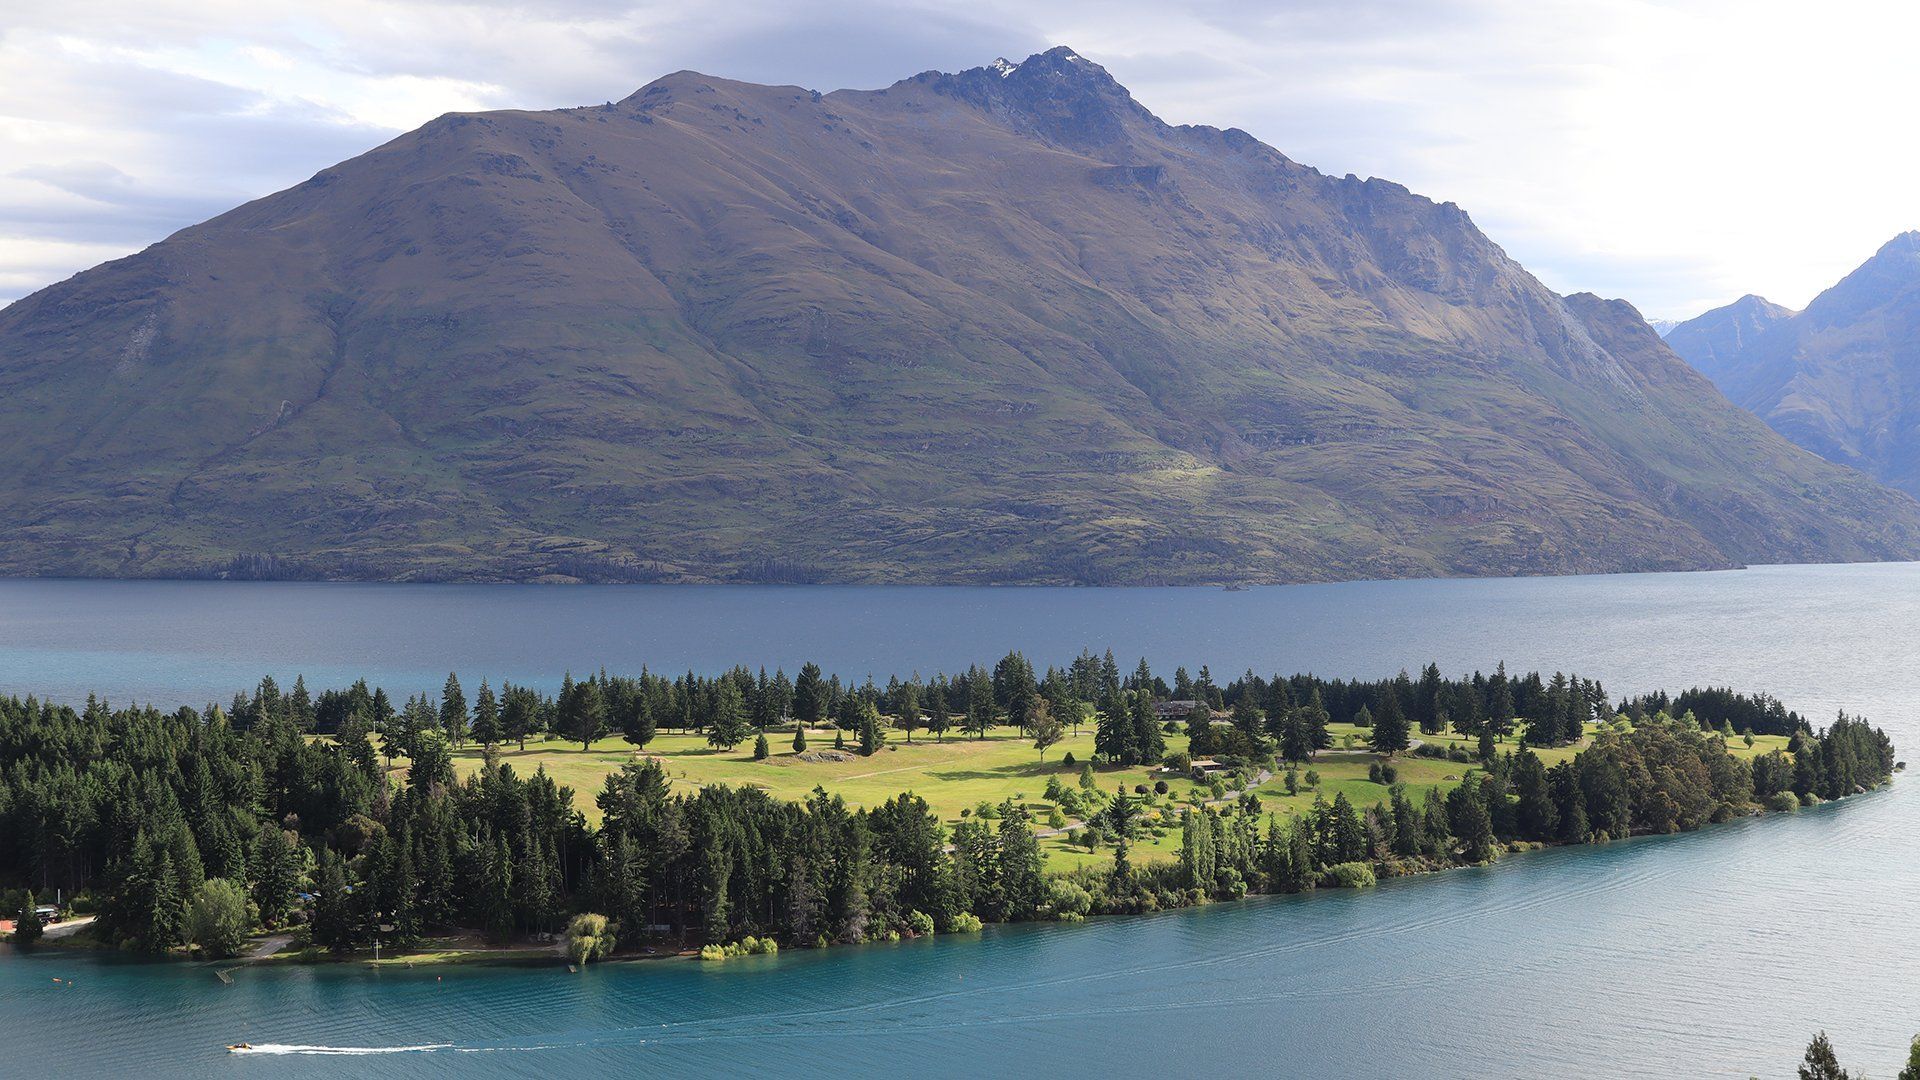 Mountains in New Zealand with a boat cruising along the lake